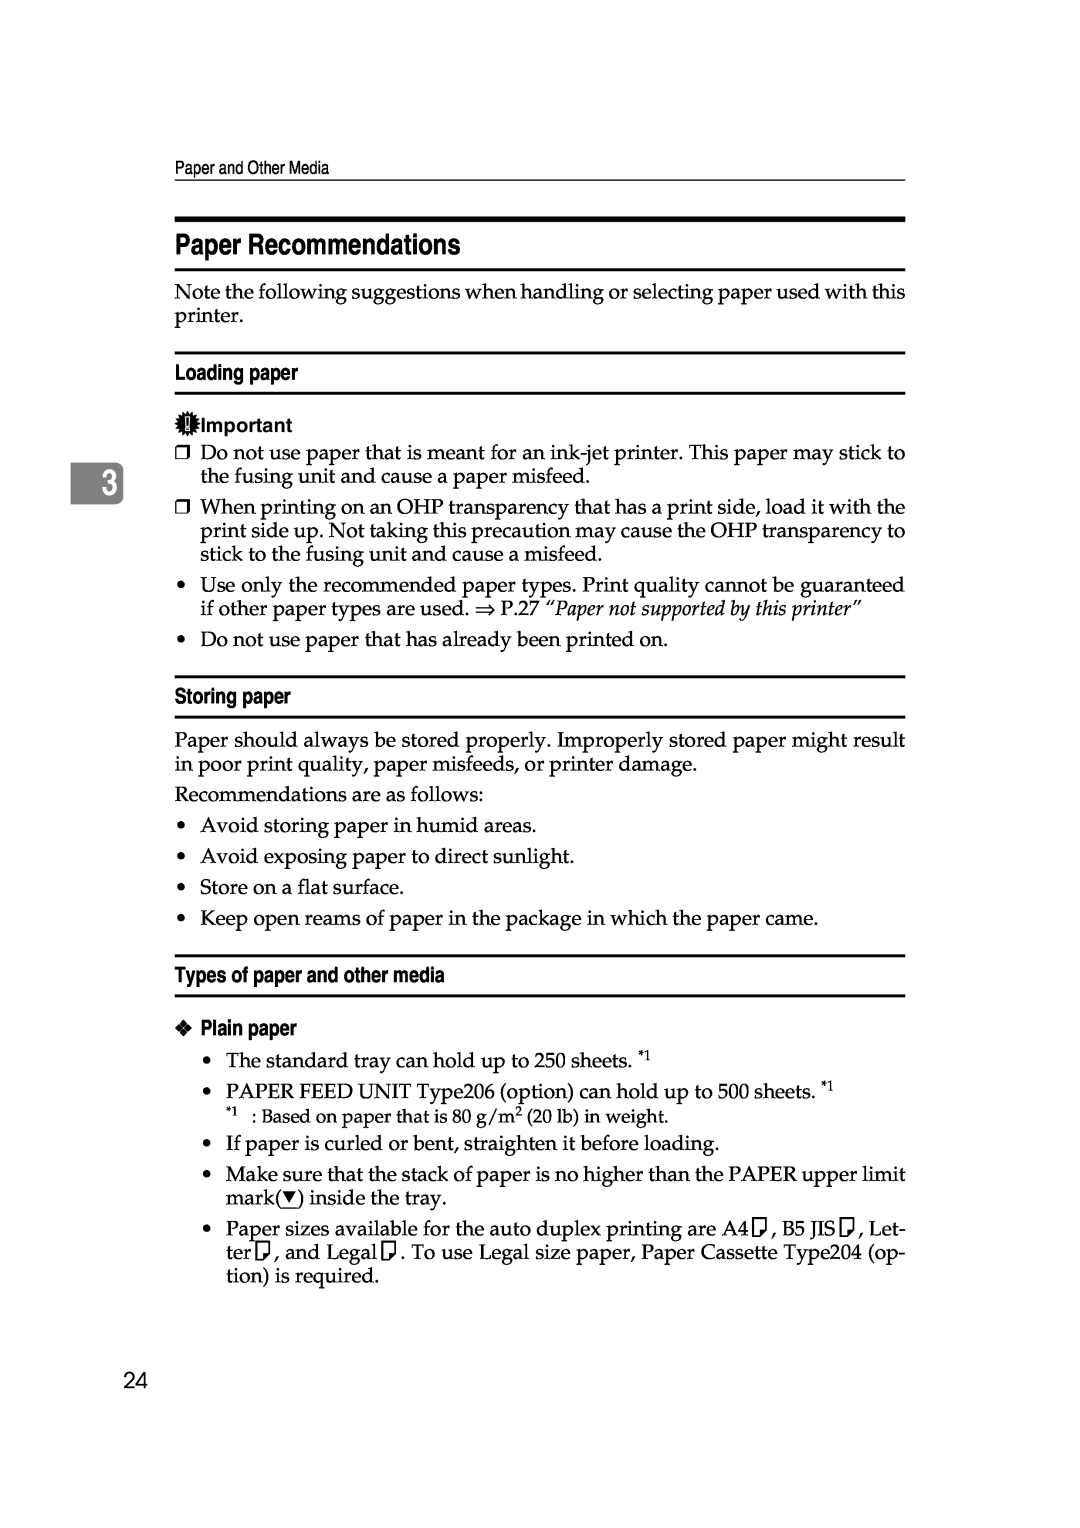 Lanier AP206 manual Paper Recommendations, Loading paper, Storing paper, Types of paper and other media Plain paper 